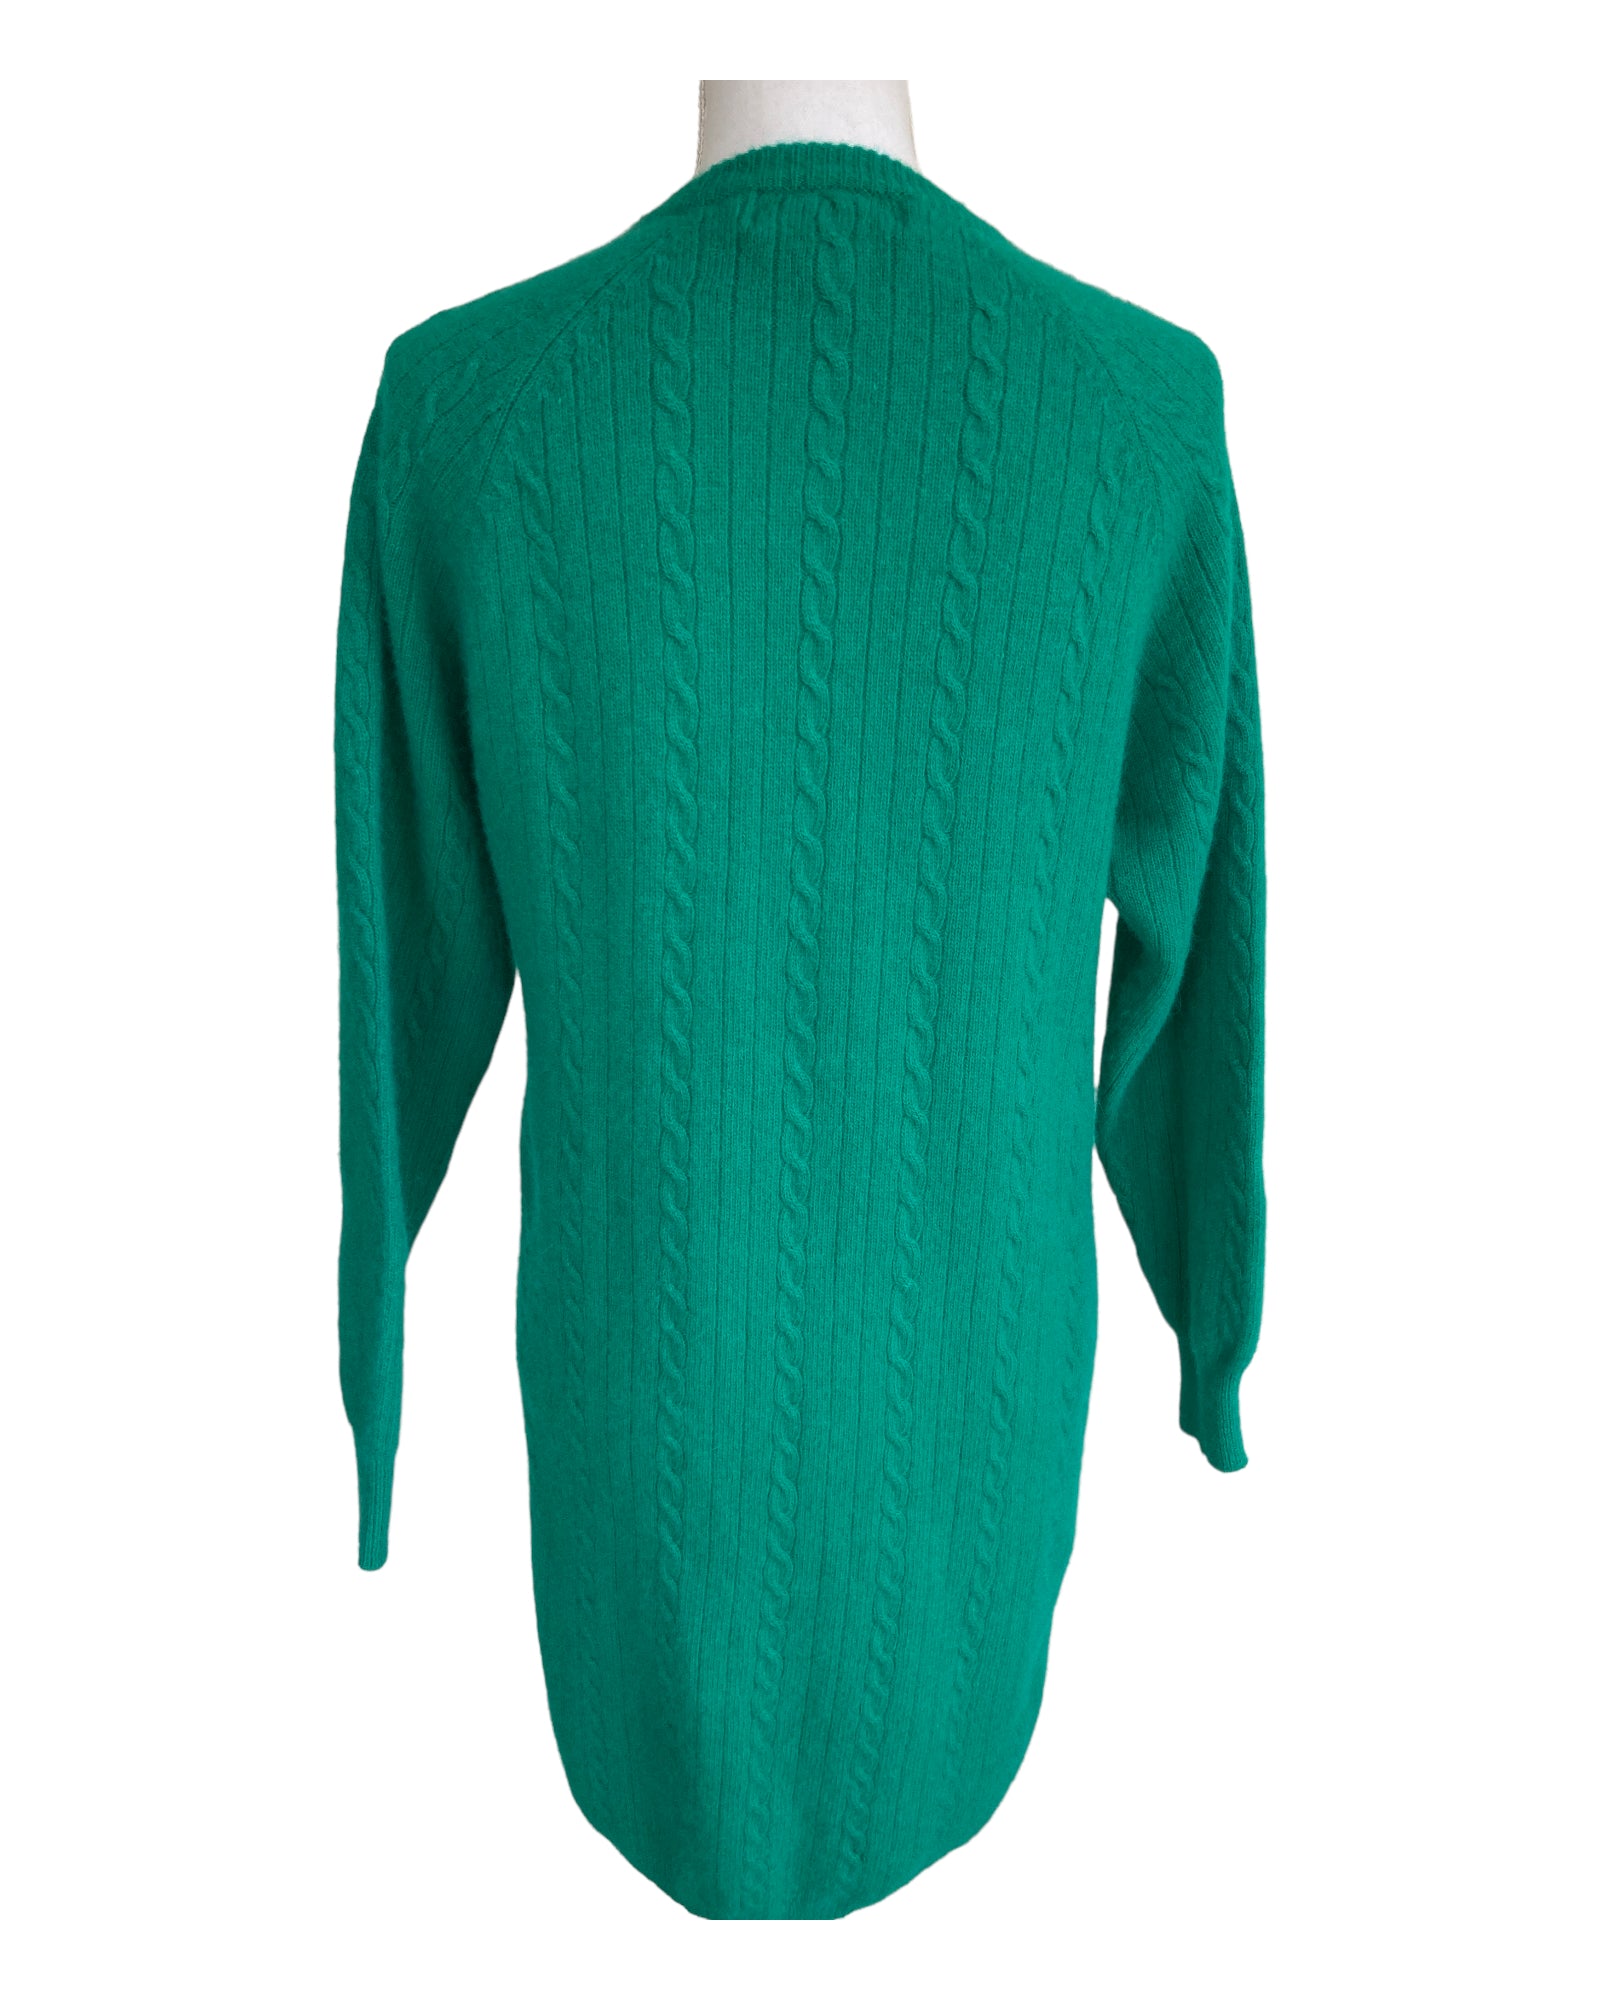 Vintage Outlander Green Cable Sweater Dress, M